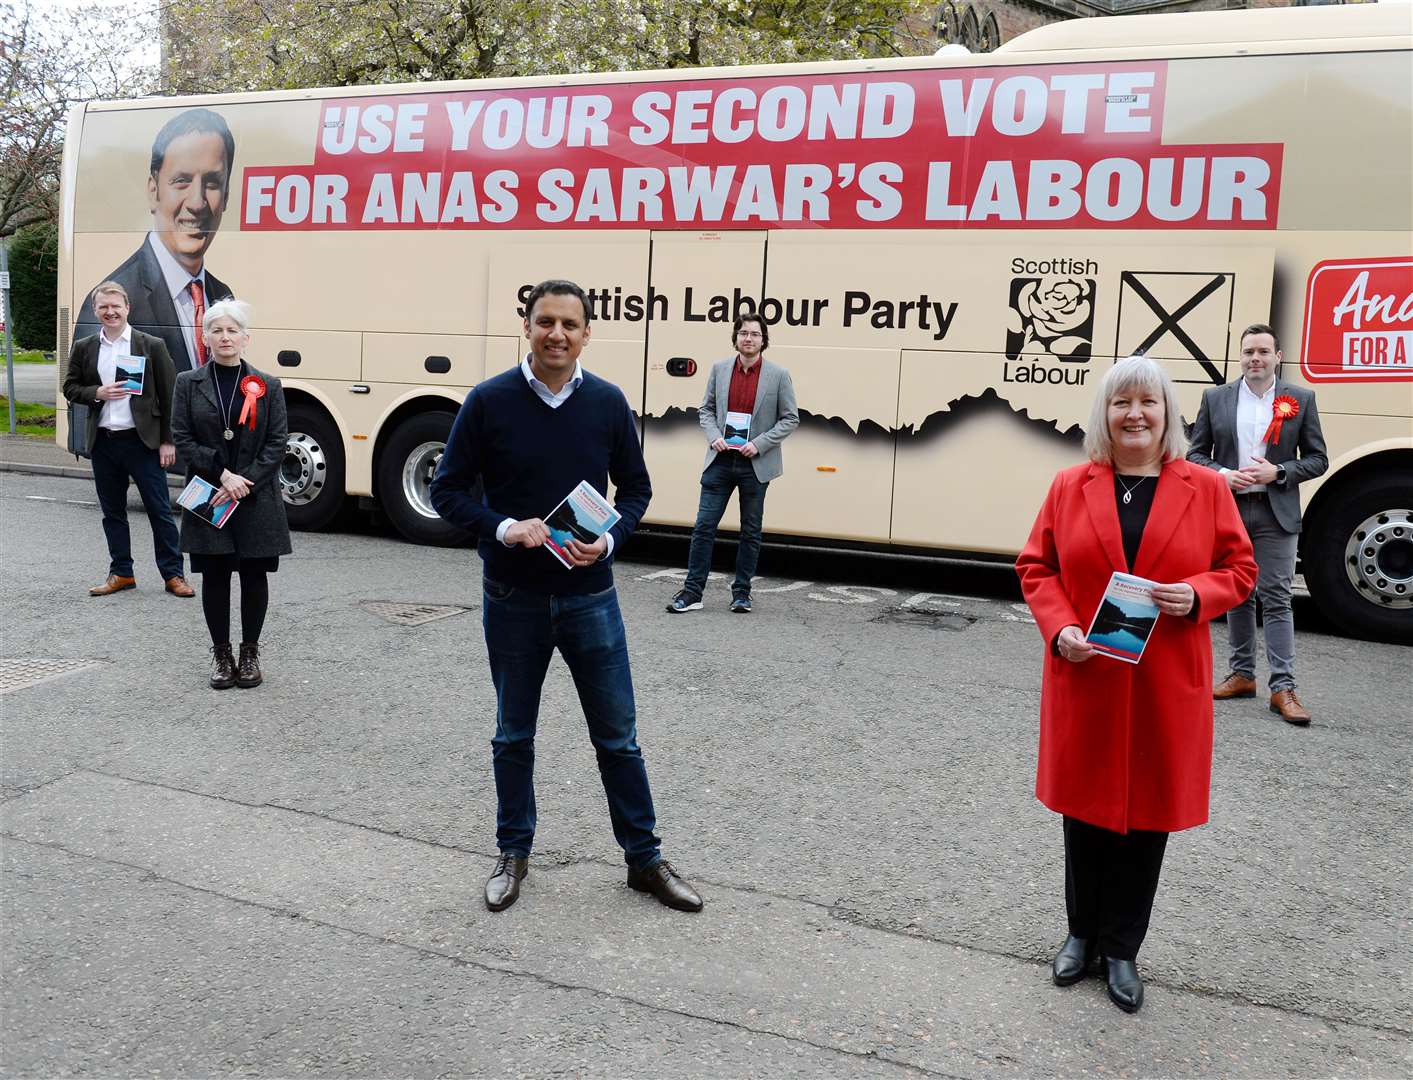 Scottish Labour leader Anas Sarwar on his last campaign visit to Inverness for the 2021 elections with Rhoda Grant at right.